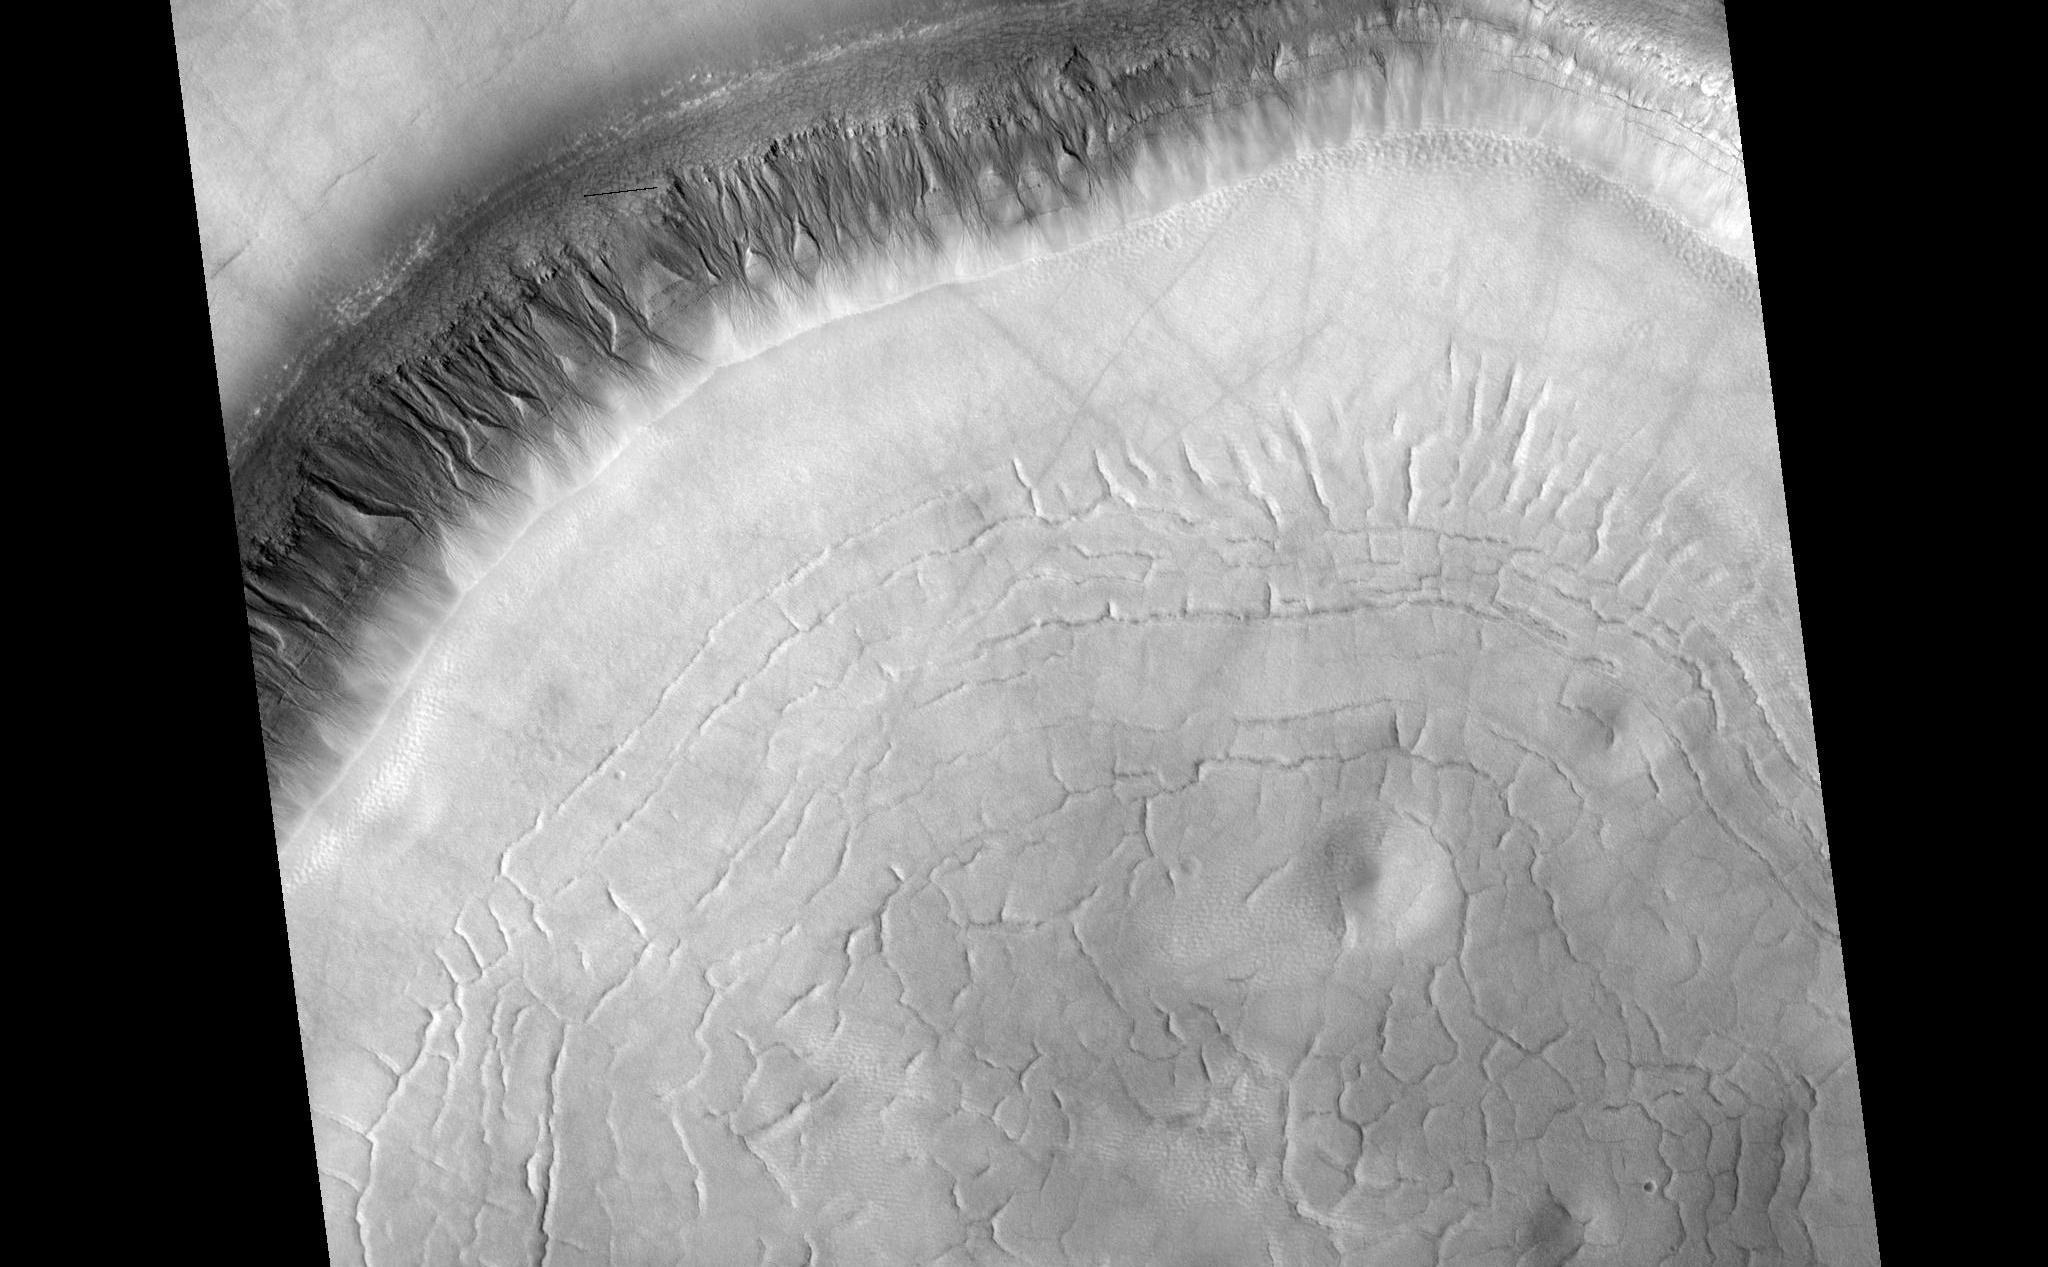 HiRISE image (PSP_001942_2310) shows a crater approximately 11 km (7 miles) in diameter, located in Acidalia Planitia, part of the Northern Plains. Several features in and around this crater are suggestive of fluids and ice at and near the surface. 

The south-looking (or equator facing) walls of this crater are cut by numerous gullies such as the ones shown in this image's cutout (500 x 600 m or 550 x 650 yards), with well developed alcoves, sinuous channels, and terminal fan deposits. These gullies seem to originate at the same height, suggesting that the carving agent may have emanated from one single layer exposed in the crater's wall. 

Contrastingly, no gullies are observed in the north-looking (or pole facing) wall of this crater. Terrestrial gullies very similar to the ones shown in this image are produced by surface water. The arrows in the cutout show fissures that may indicate detachment of surficial materials possibly held together by subsurface ice, sliding en masse down the crater's wall. 

The muted topography of the crater and its surroundings, the relatively shallow floor (300 m or 330 yards), the convex slope of its walls-all are consistent with ice being present under the surface, mixed with rocks and soil. Ice would have acted as a lubricant, facilitating the flow of rocks and soils and hence smoothing landscape's features such as ridges and craters' rims.

The concentric and radial fissures in the crater's floor may indicate decrease of volume due to loss of underground ice. Piles of rocks aligned along these fissures and arranged forming polygons are similar to features observed in terrestrial periglacial regions such as Antarctica. Antarctica's features are produced by repeated expansion and contraction of subsurface soil and ice, due to seasonal temperature oscillations. The funnel-shaped depressions visible in the crater's floor could be collapse pits, further evidence of ice decay; alternatively, they could be smoothed-out impact craters.